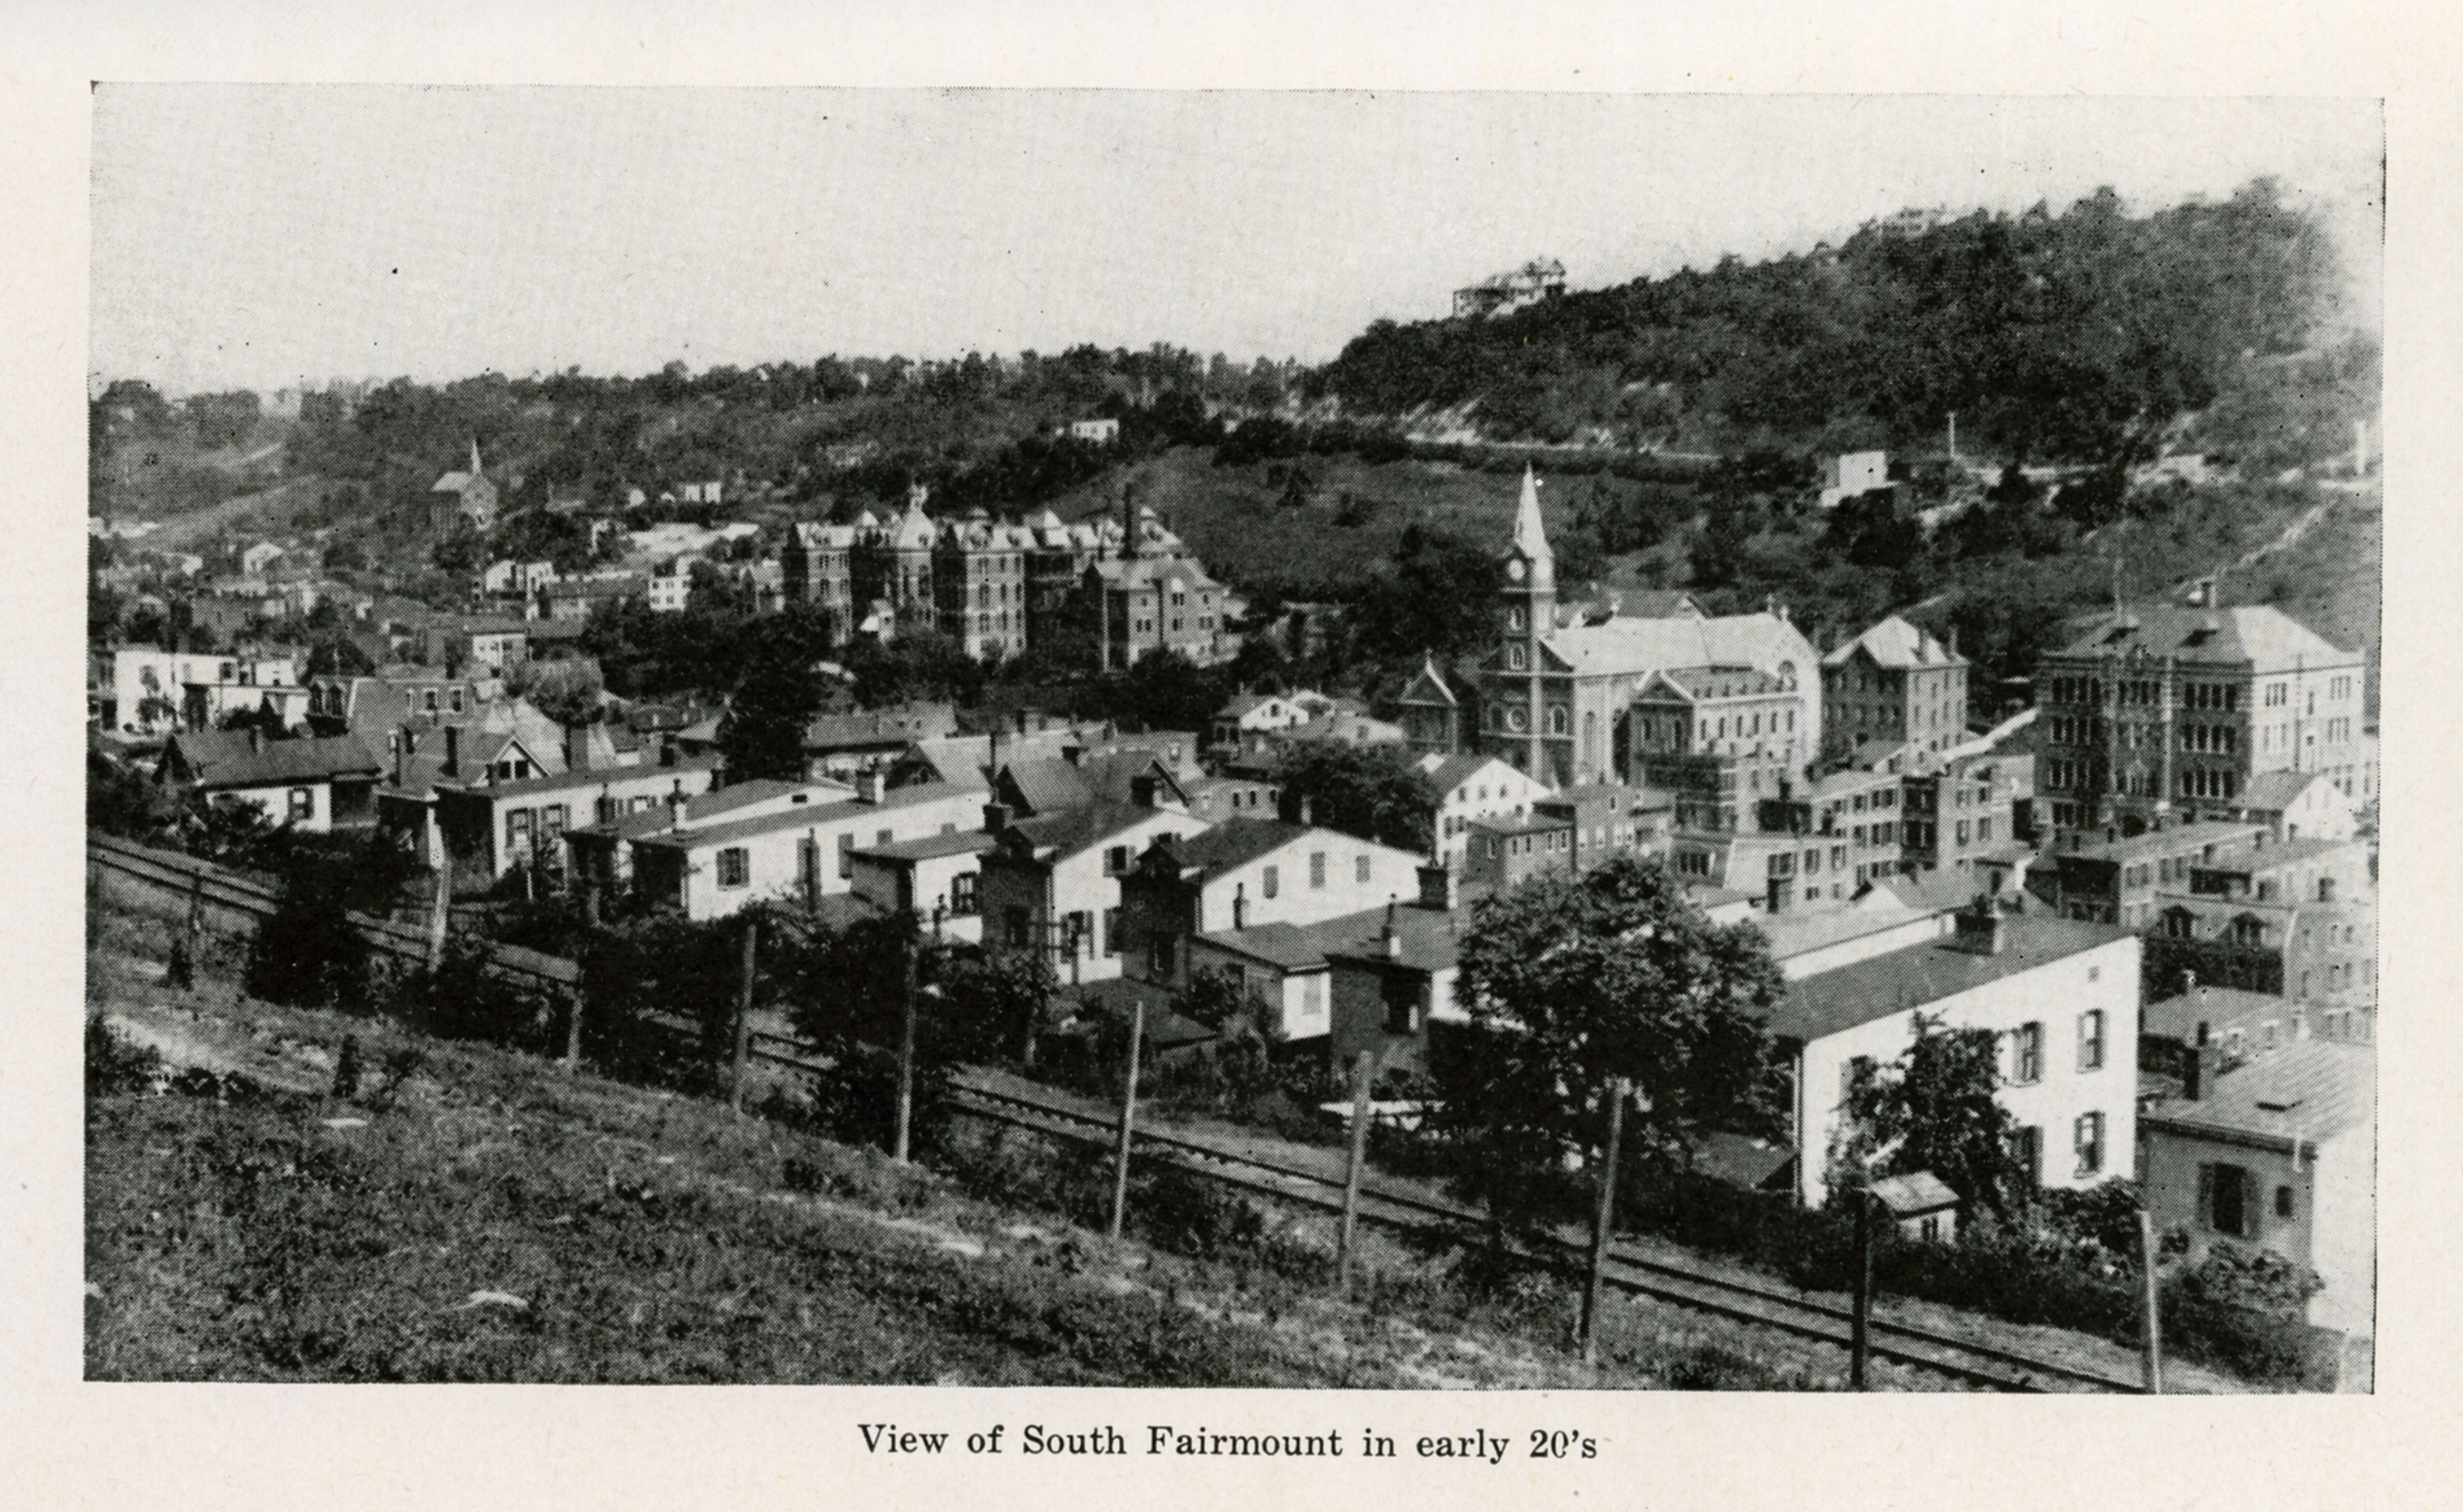 View of South Fairmount in the early 1920s, with St. Bonaventure Church and School in the background (center) and Martini Church in the background (left).